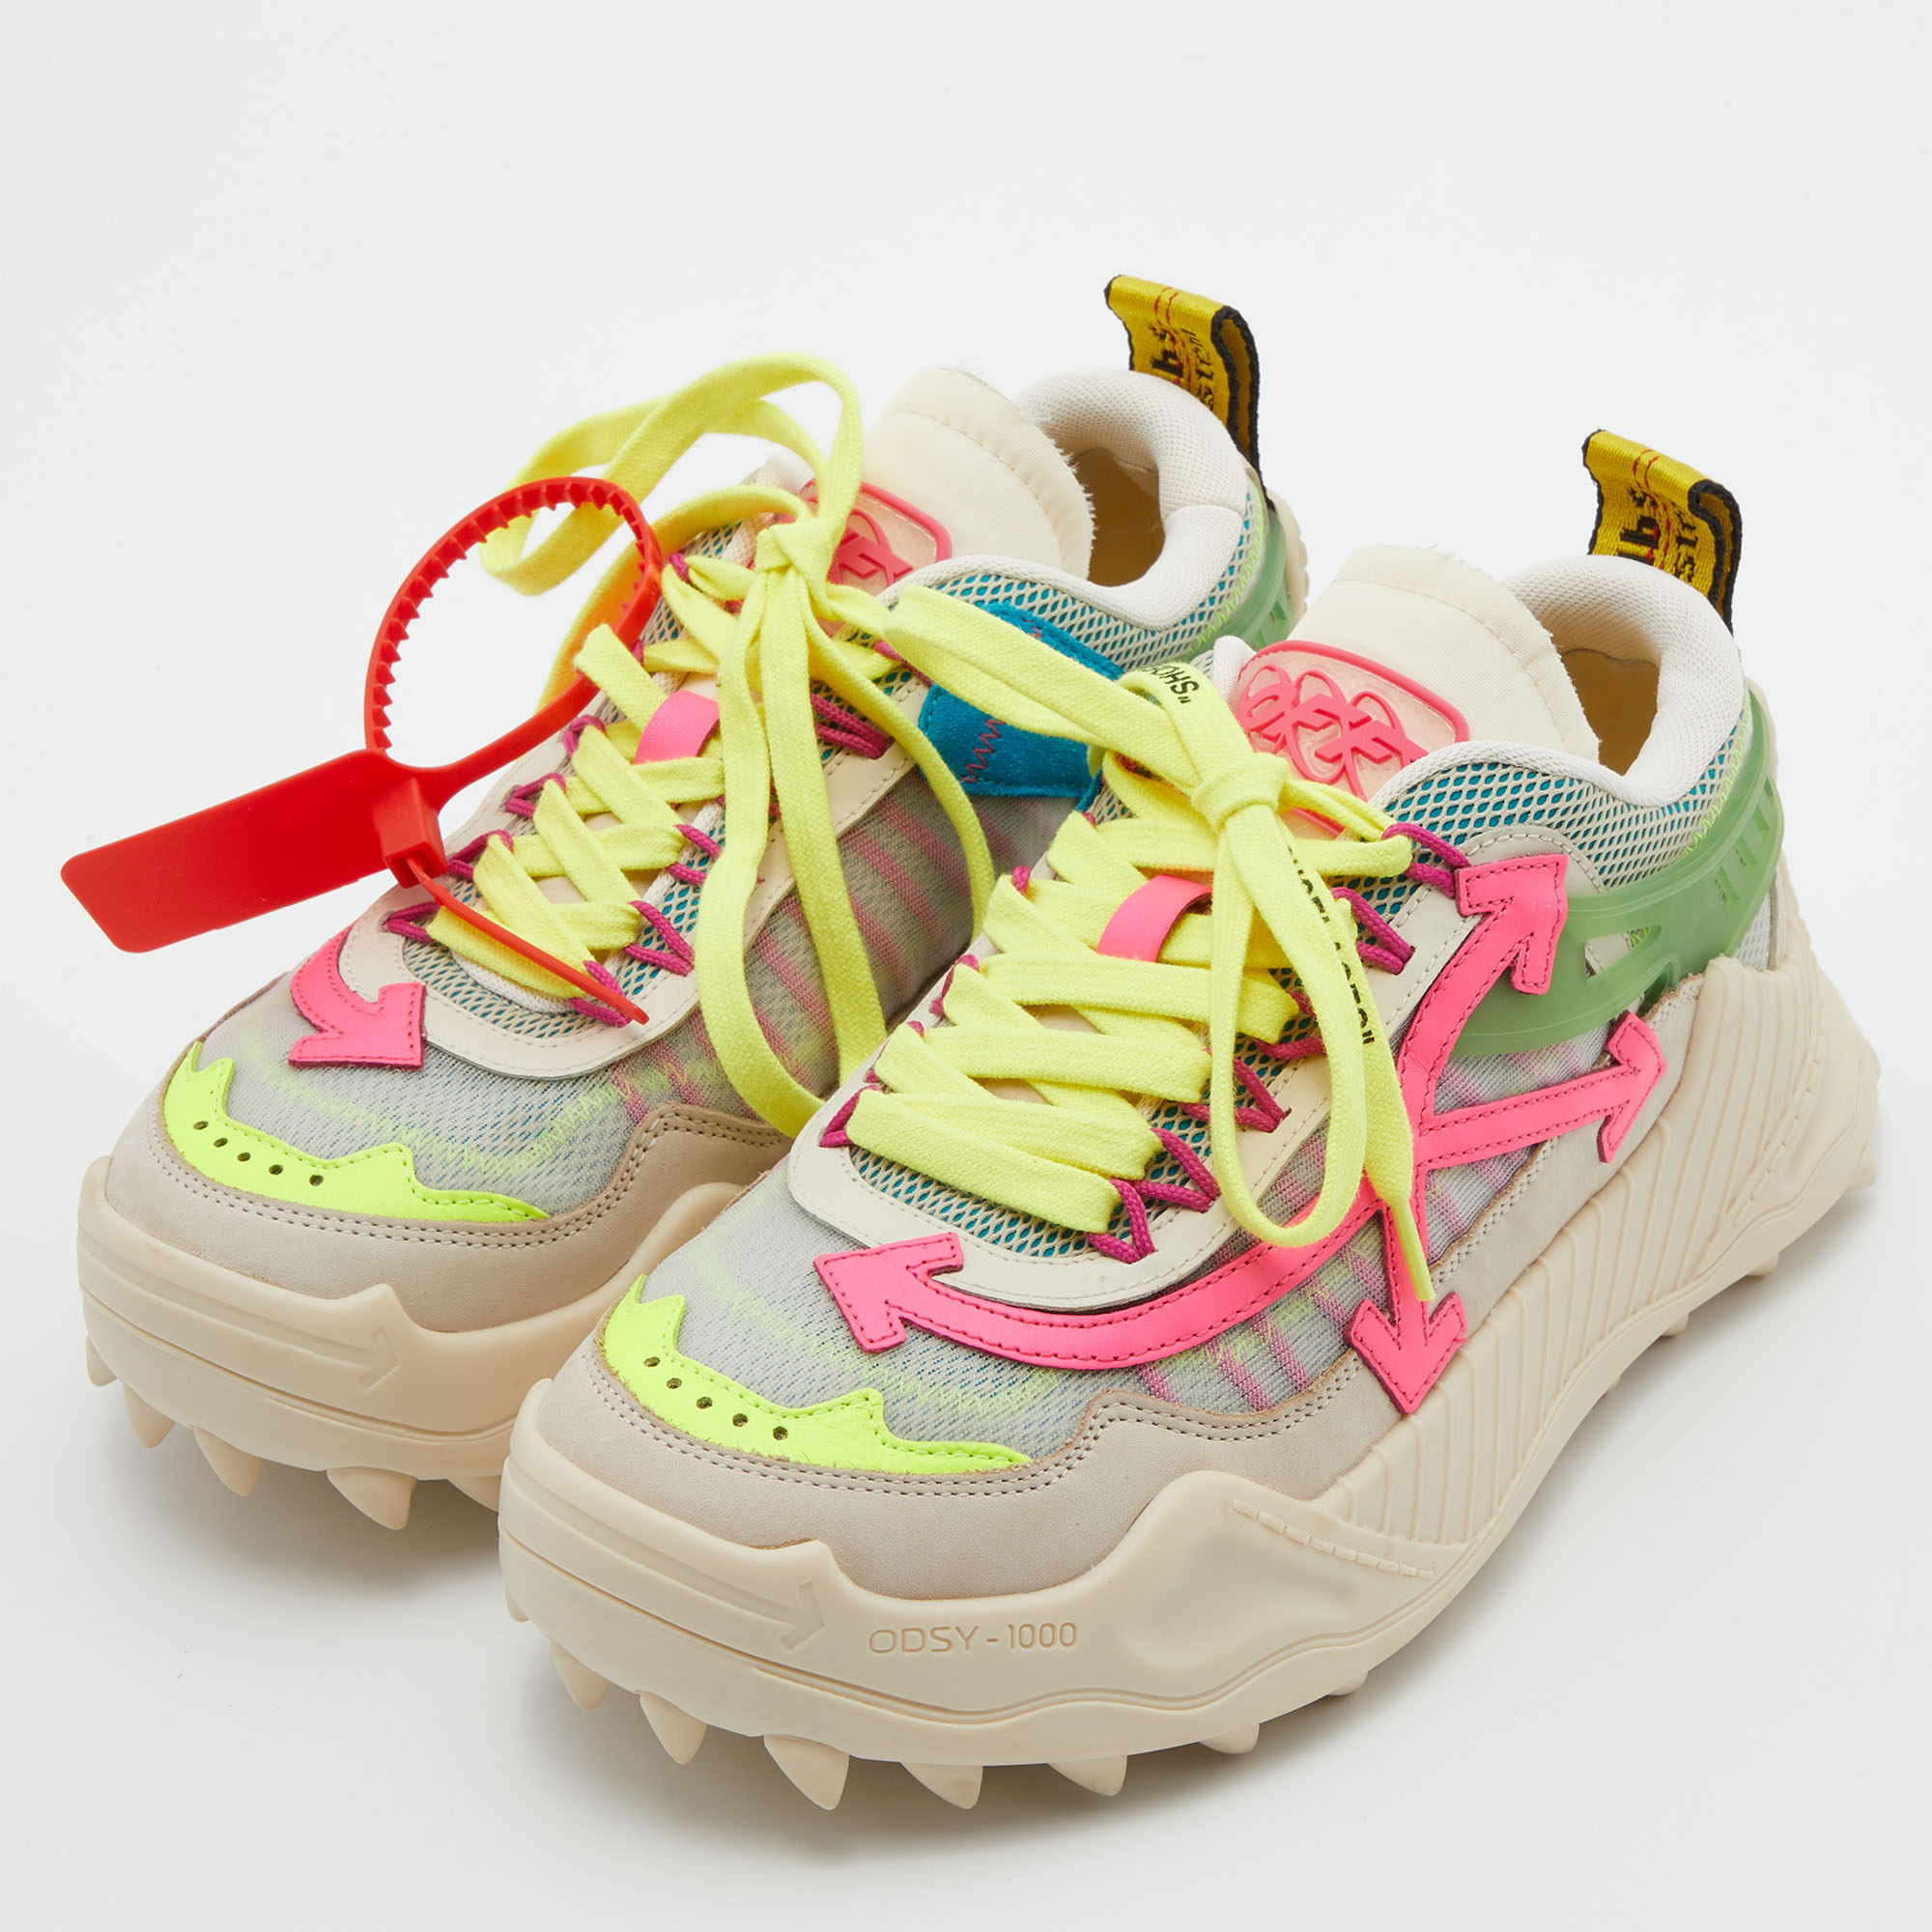 

Off-White Multicolor Mesh and Leather Odsy 1000 Sneakers Size